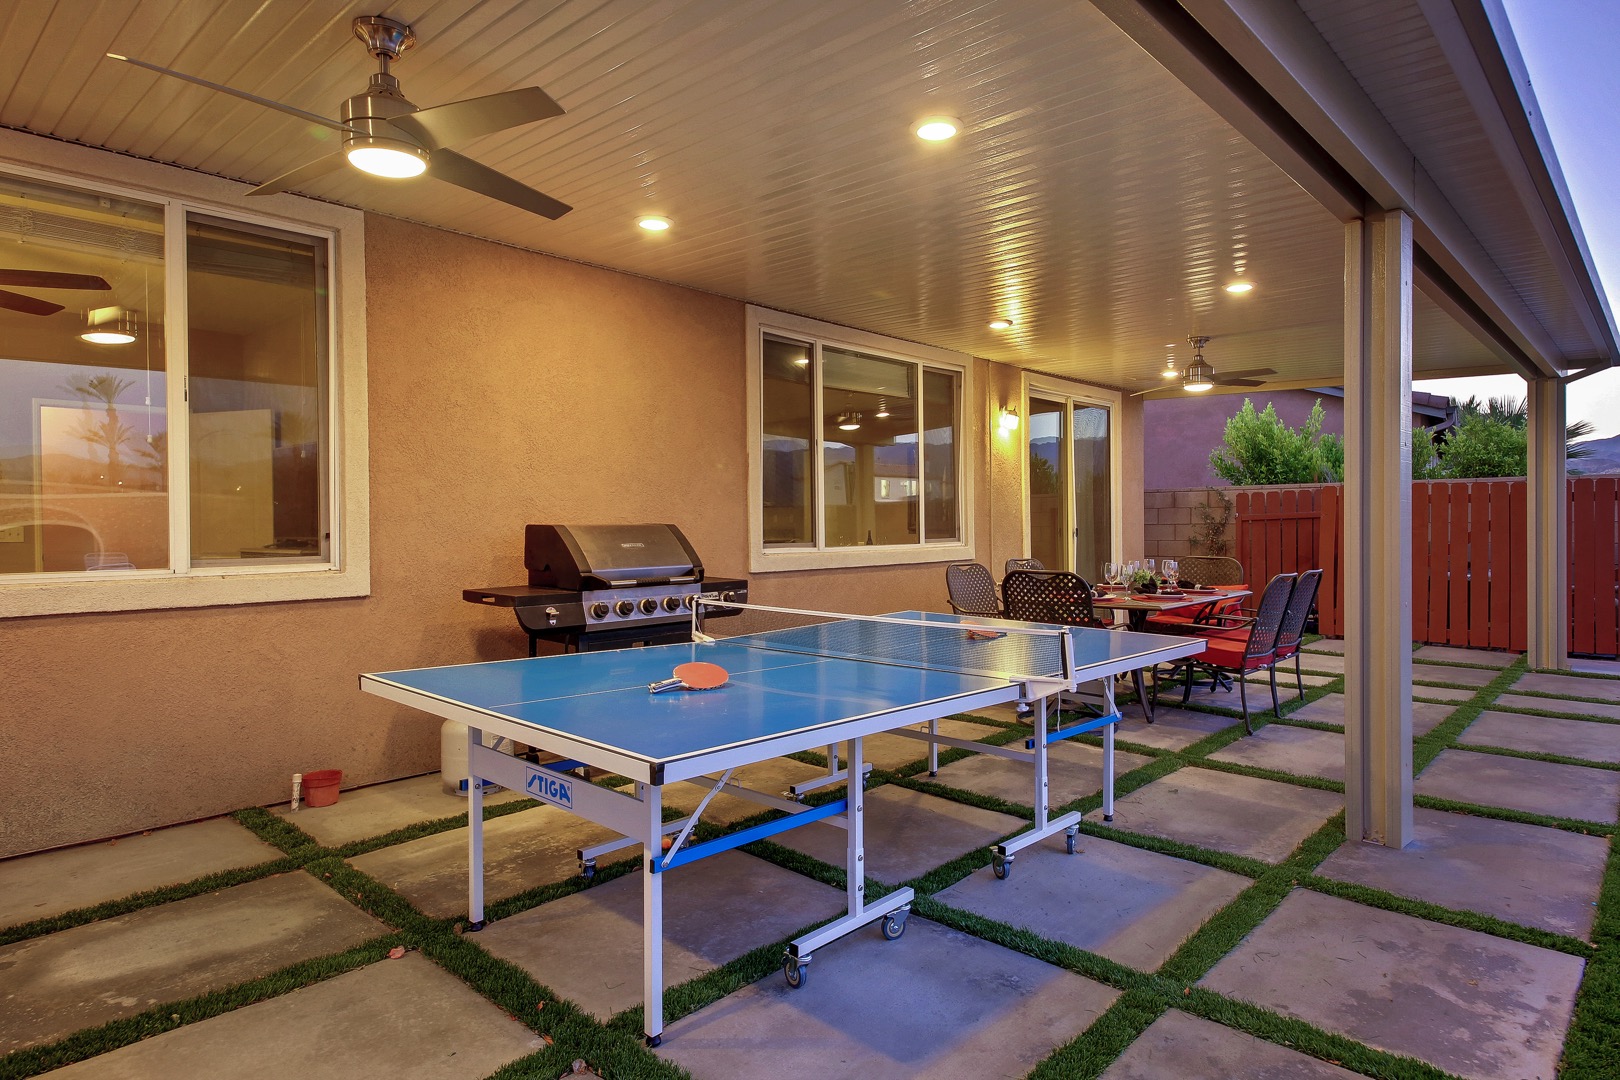 Challenge other guest to a game of ping pong or cook up some steaks on the newer barbeque